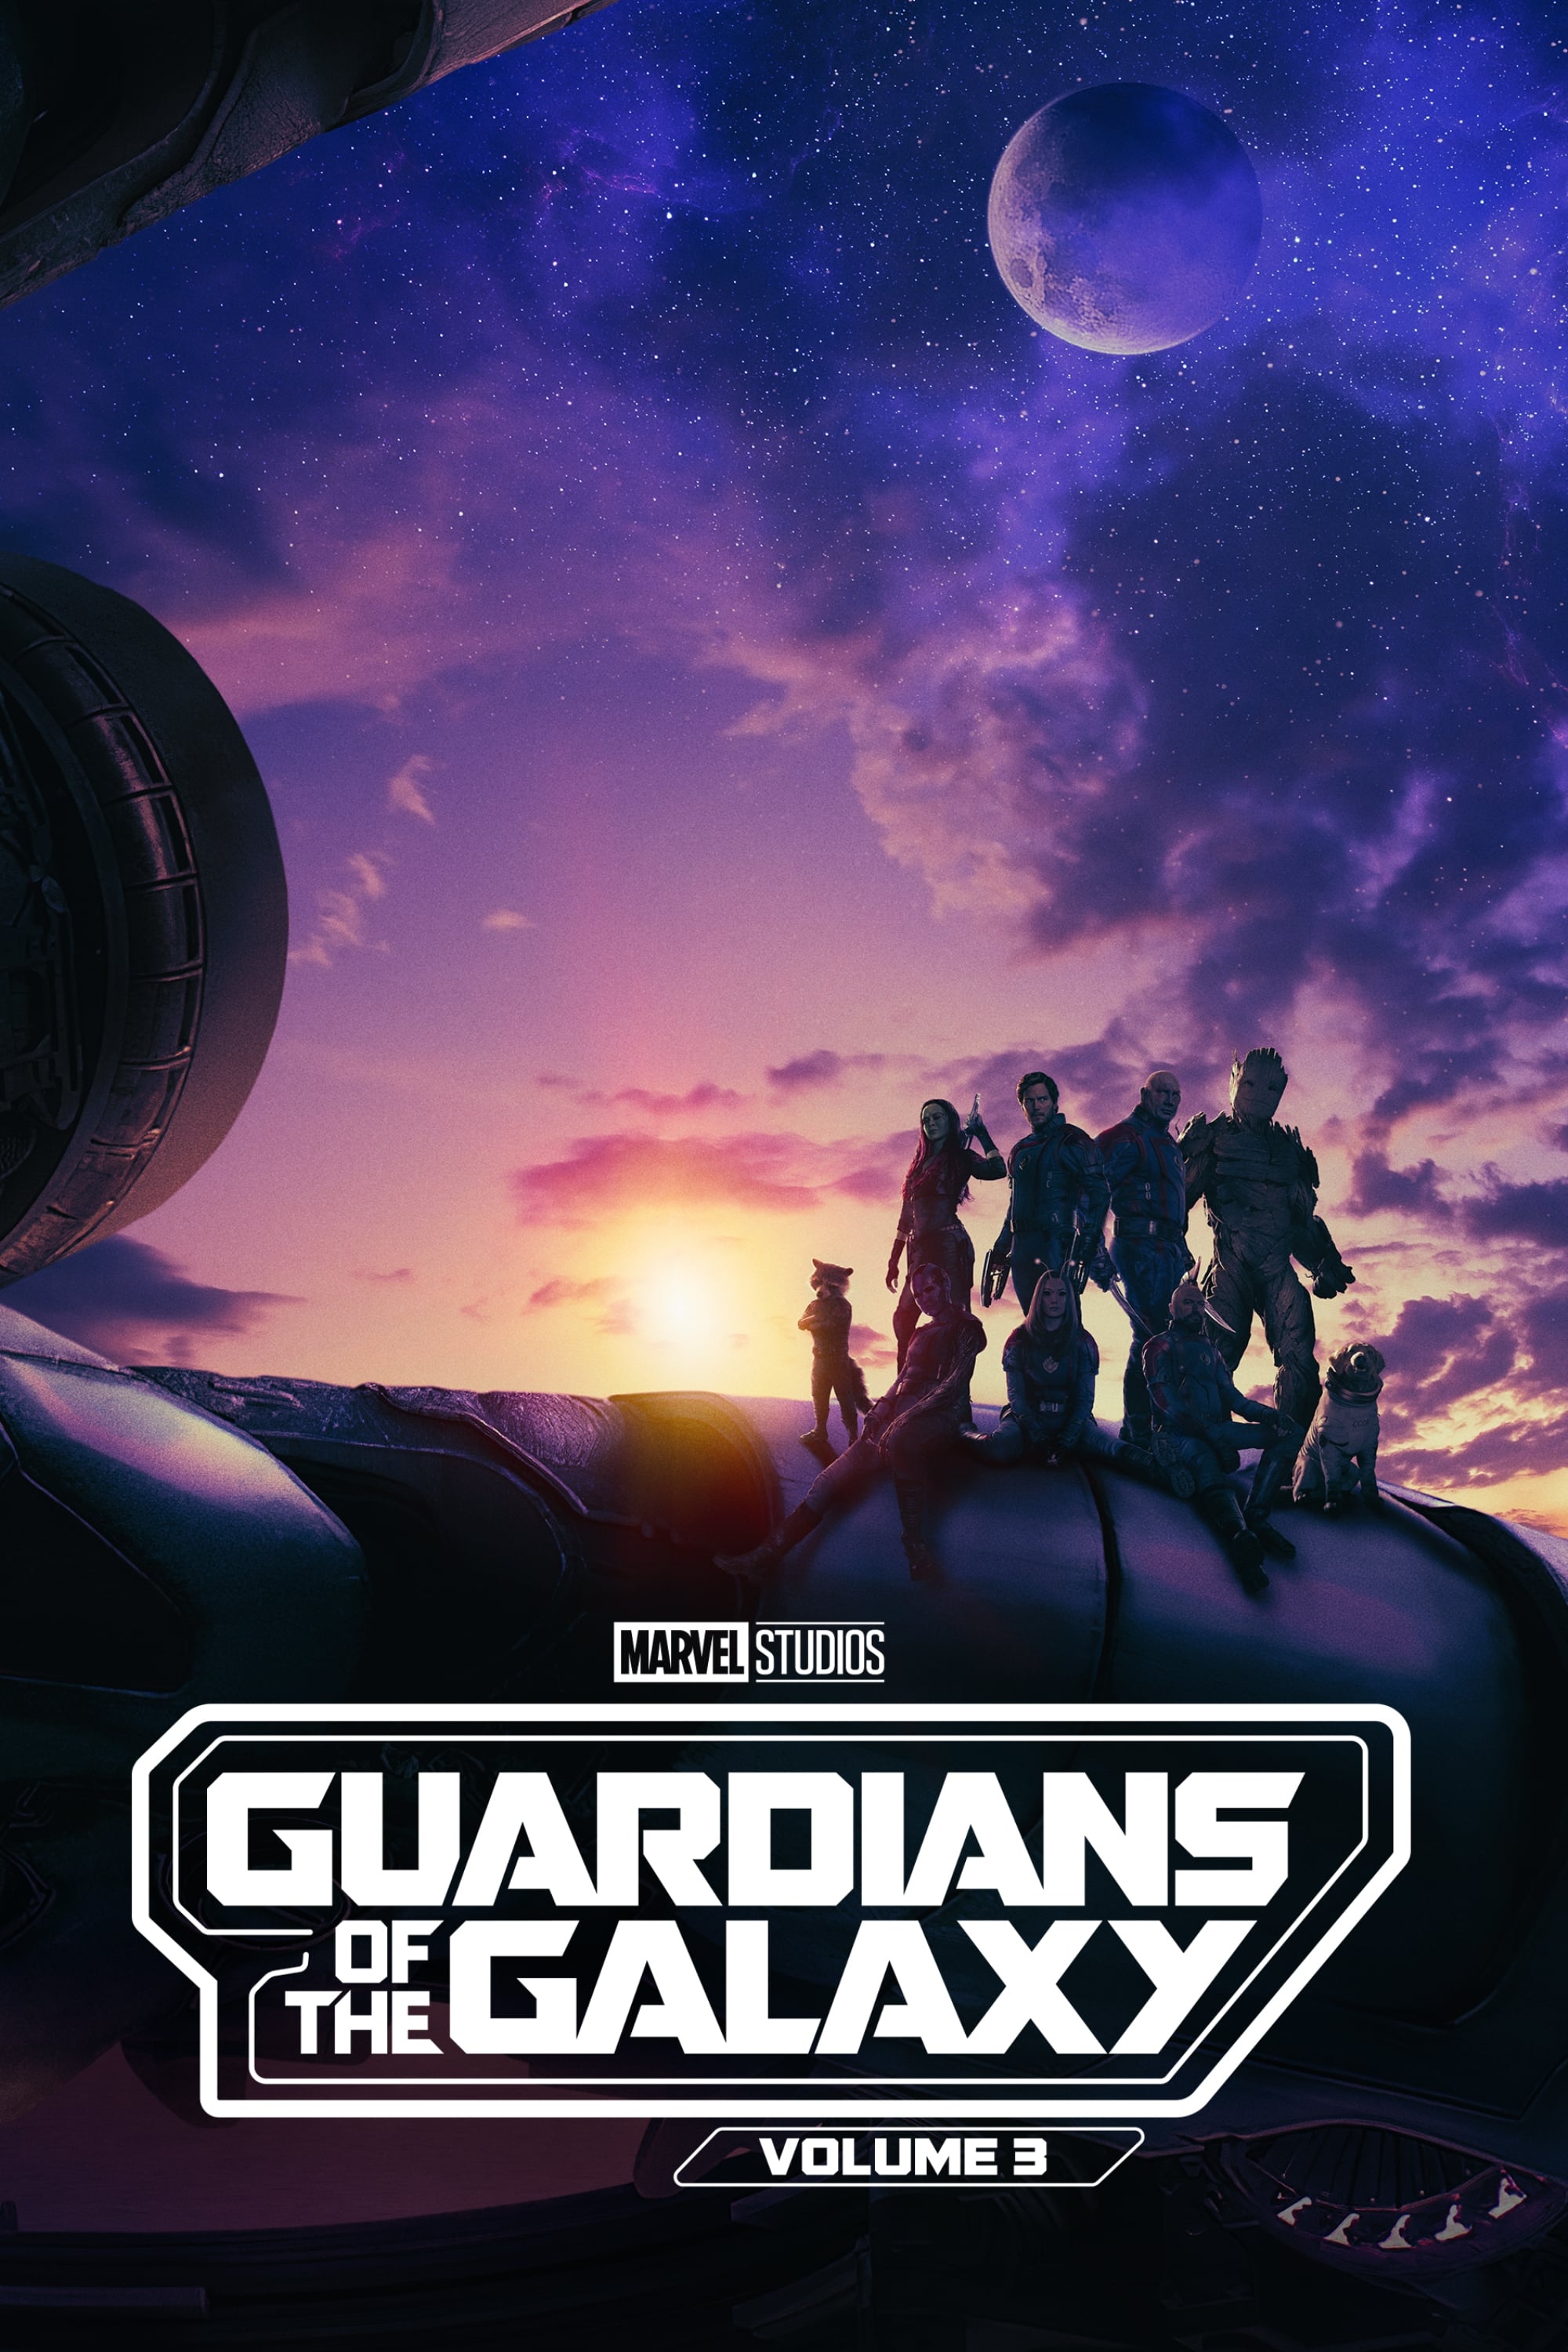 Guardians of the Galaxy Volume 3 Movie poster